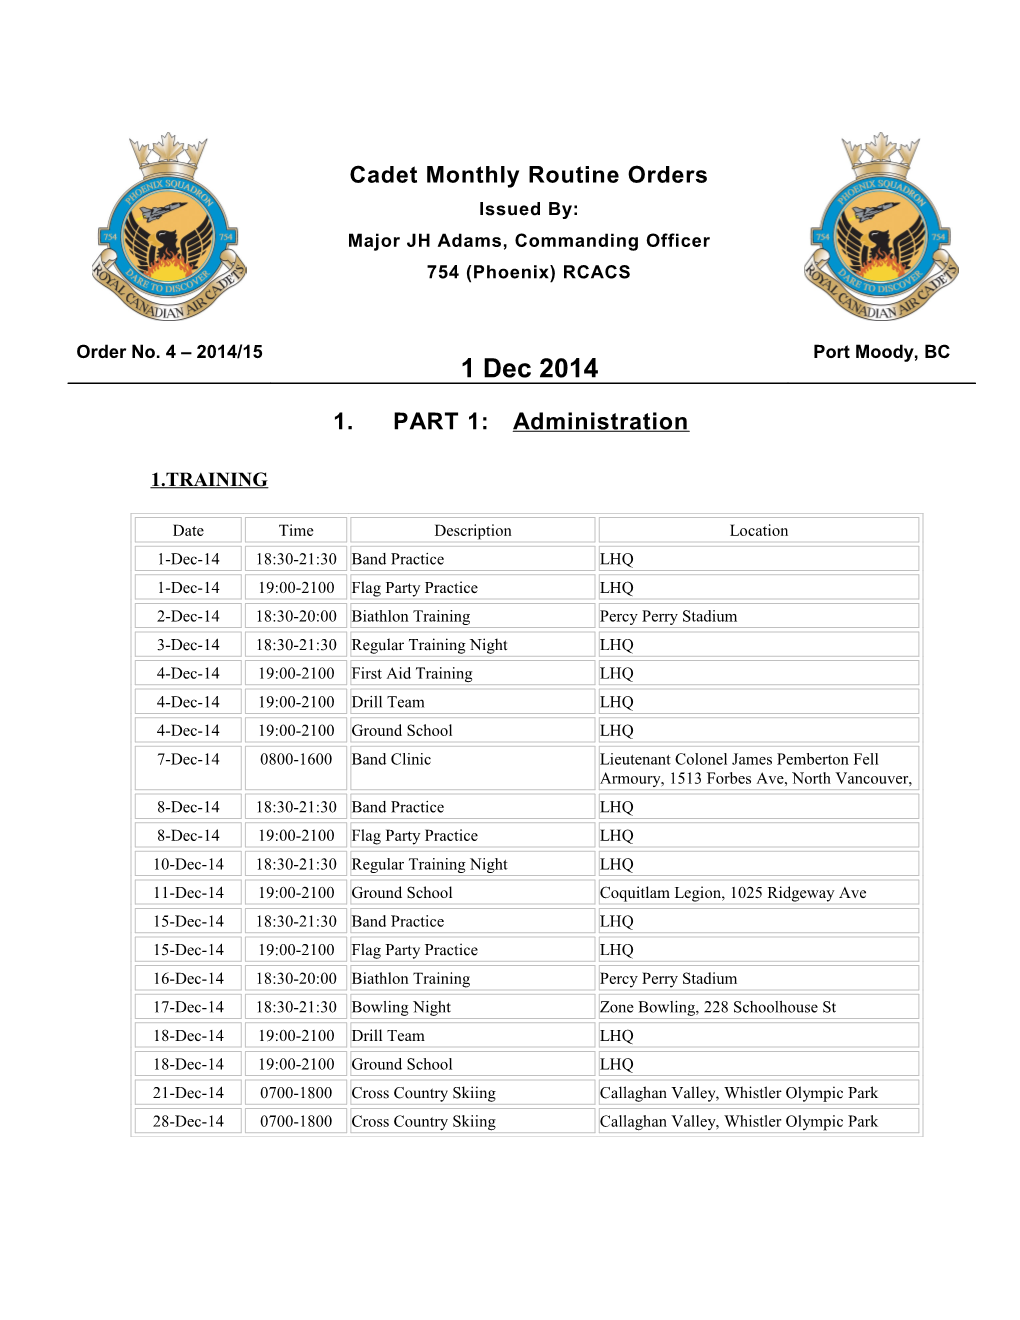 Cadet Monthly Routine Ordersissued By:Major JH Adams, Commanding Officer754 (Phoenix) RCACS s1